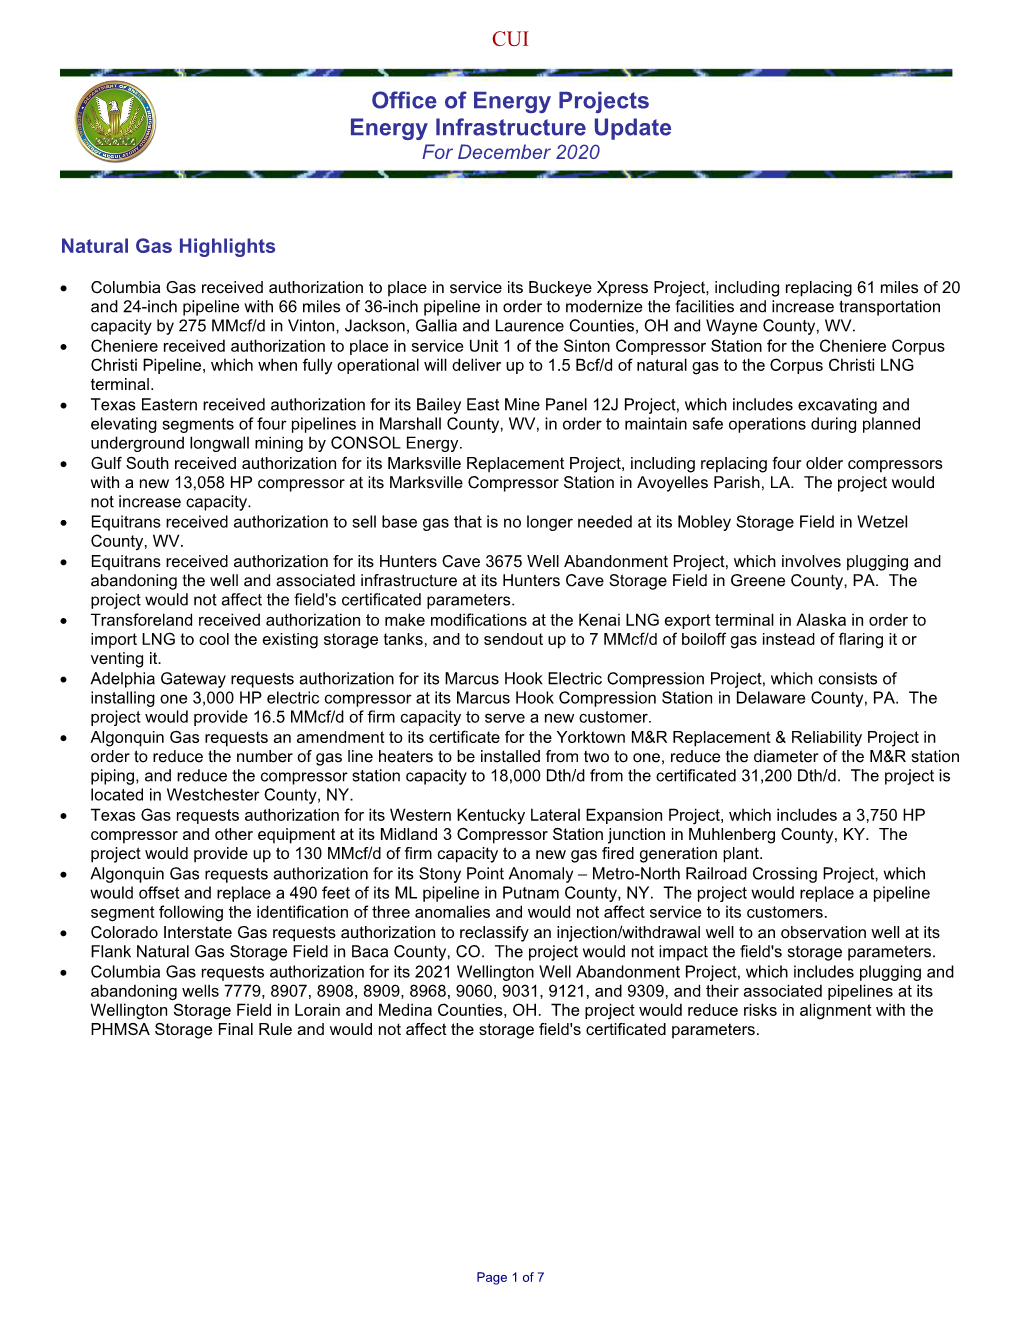 Office of Energy Projects Energy Infrastructure Update for December 2020